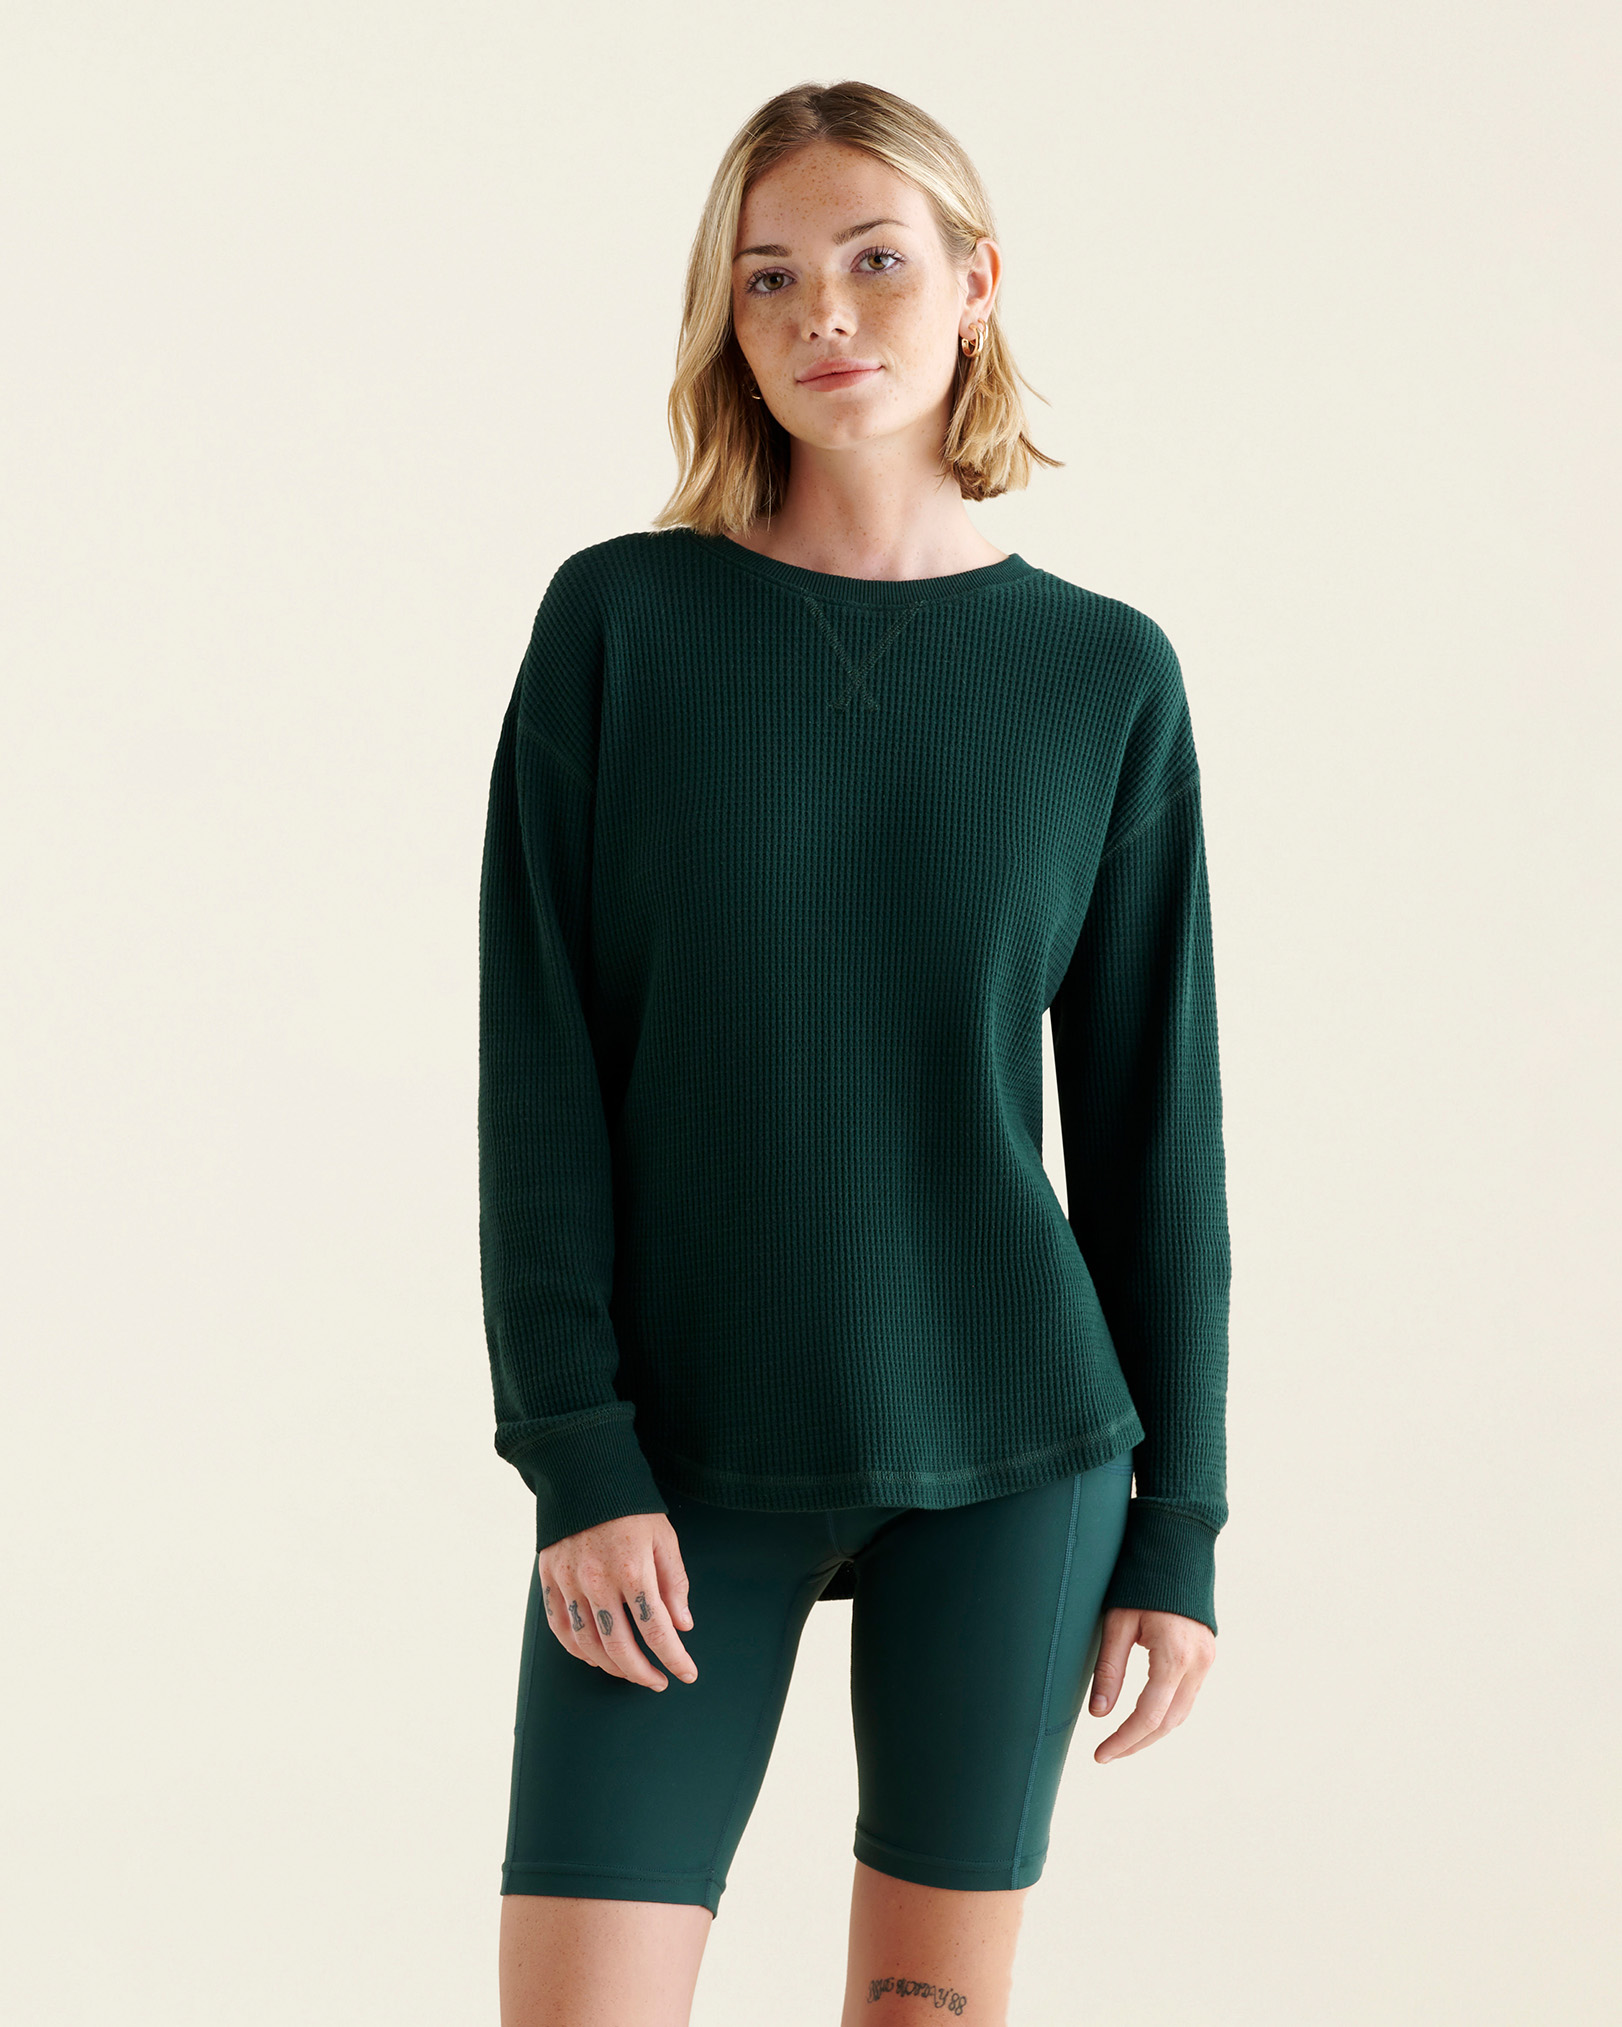 Roots Waffle Long Sleeve Top in Varsity Green